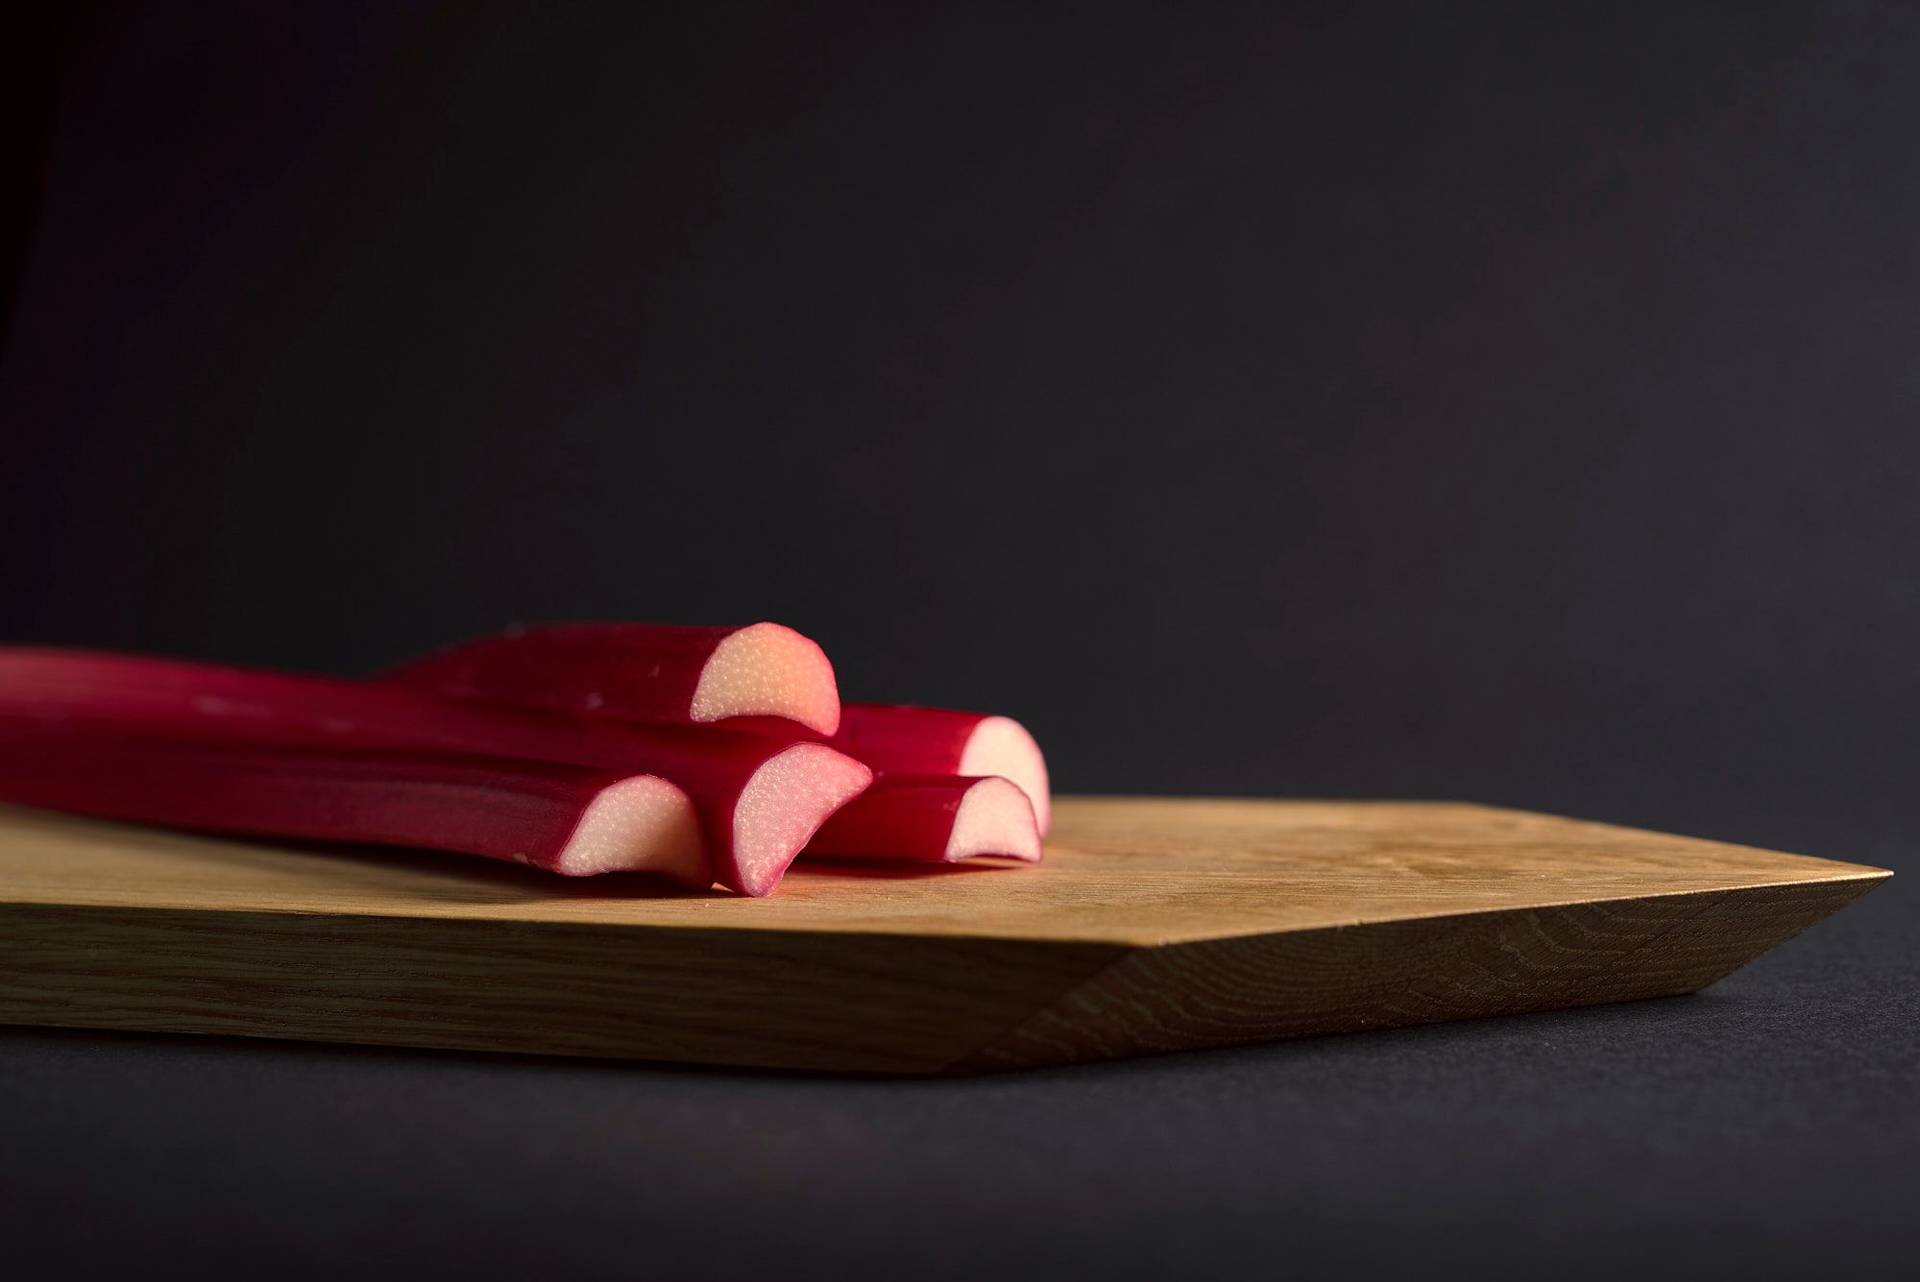 three pieces of rhubarb on a wooden board with black background